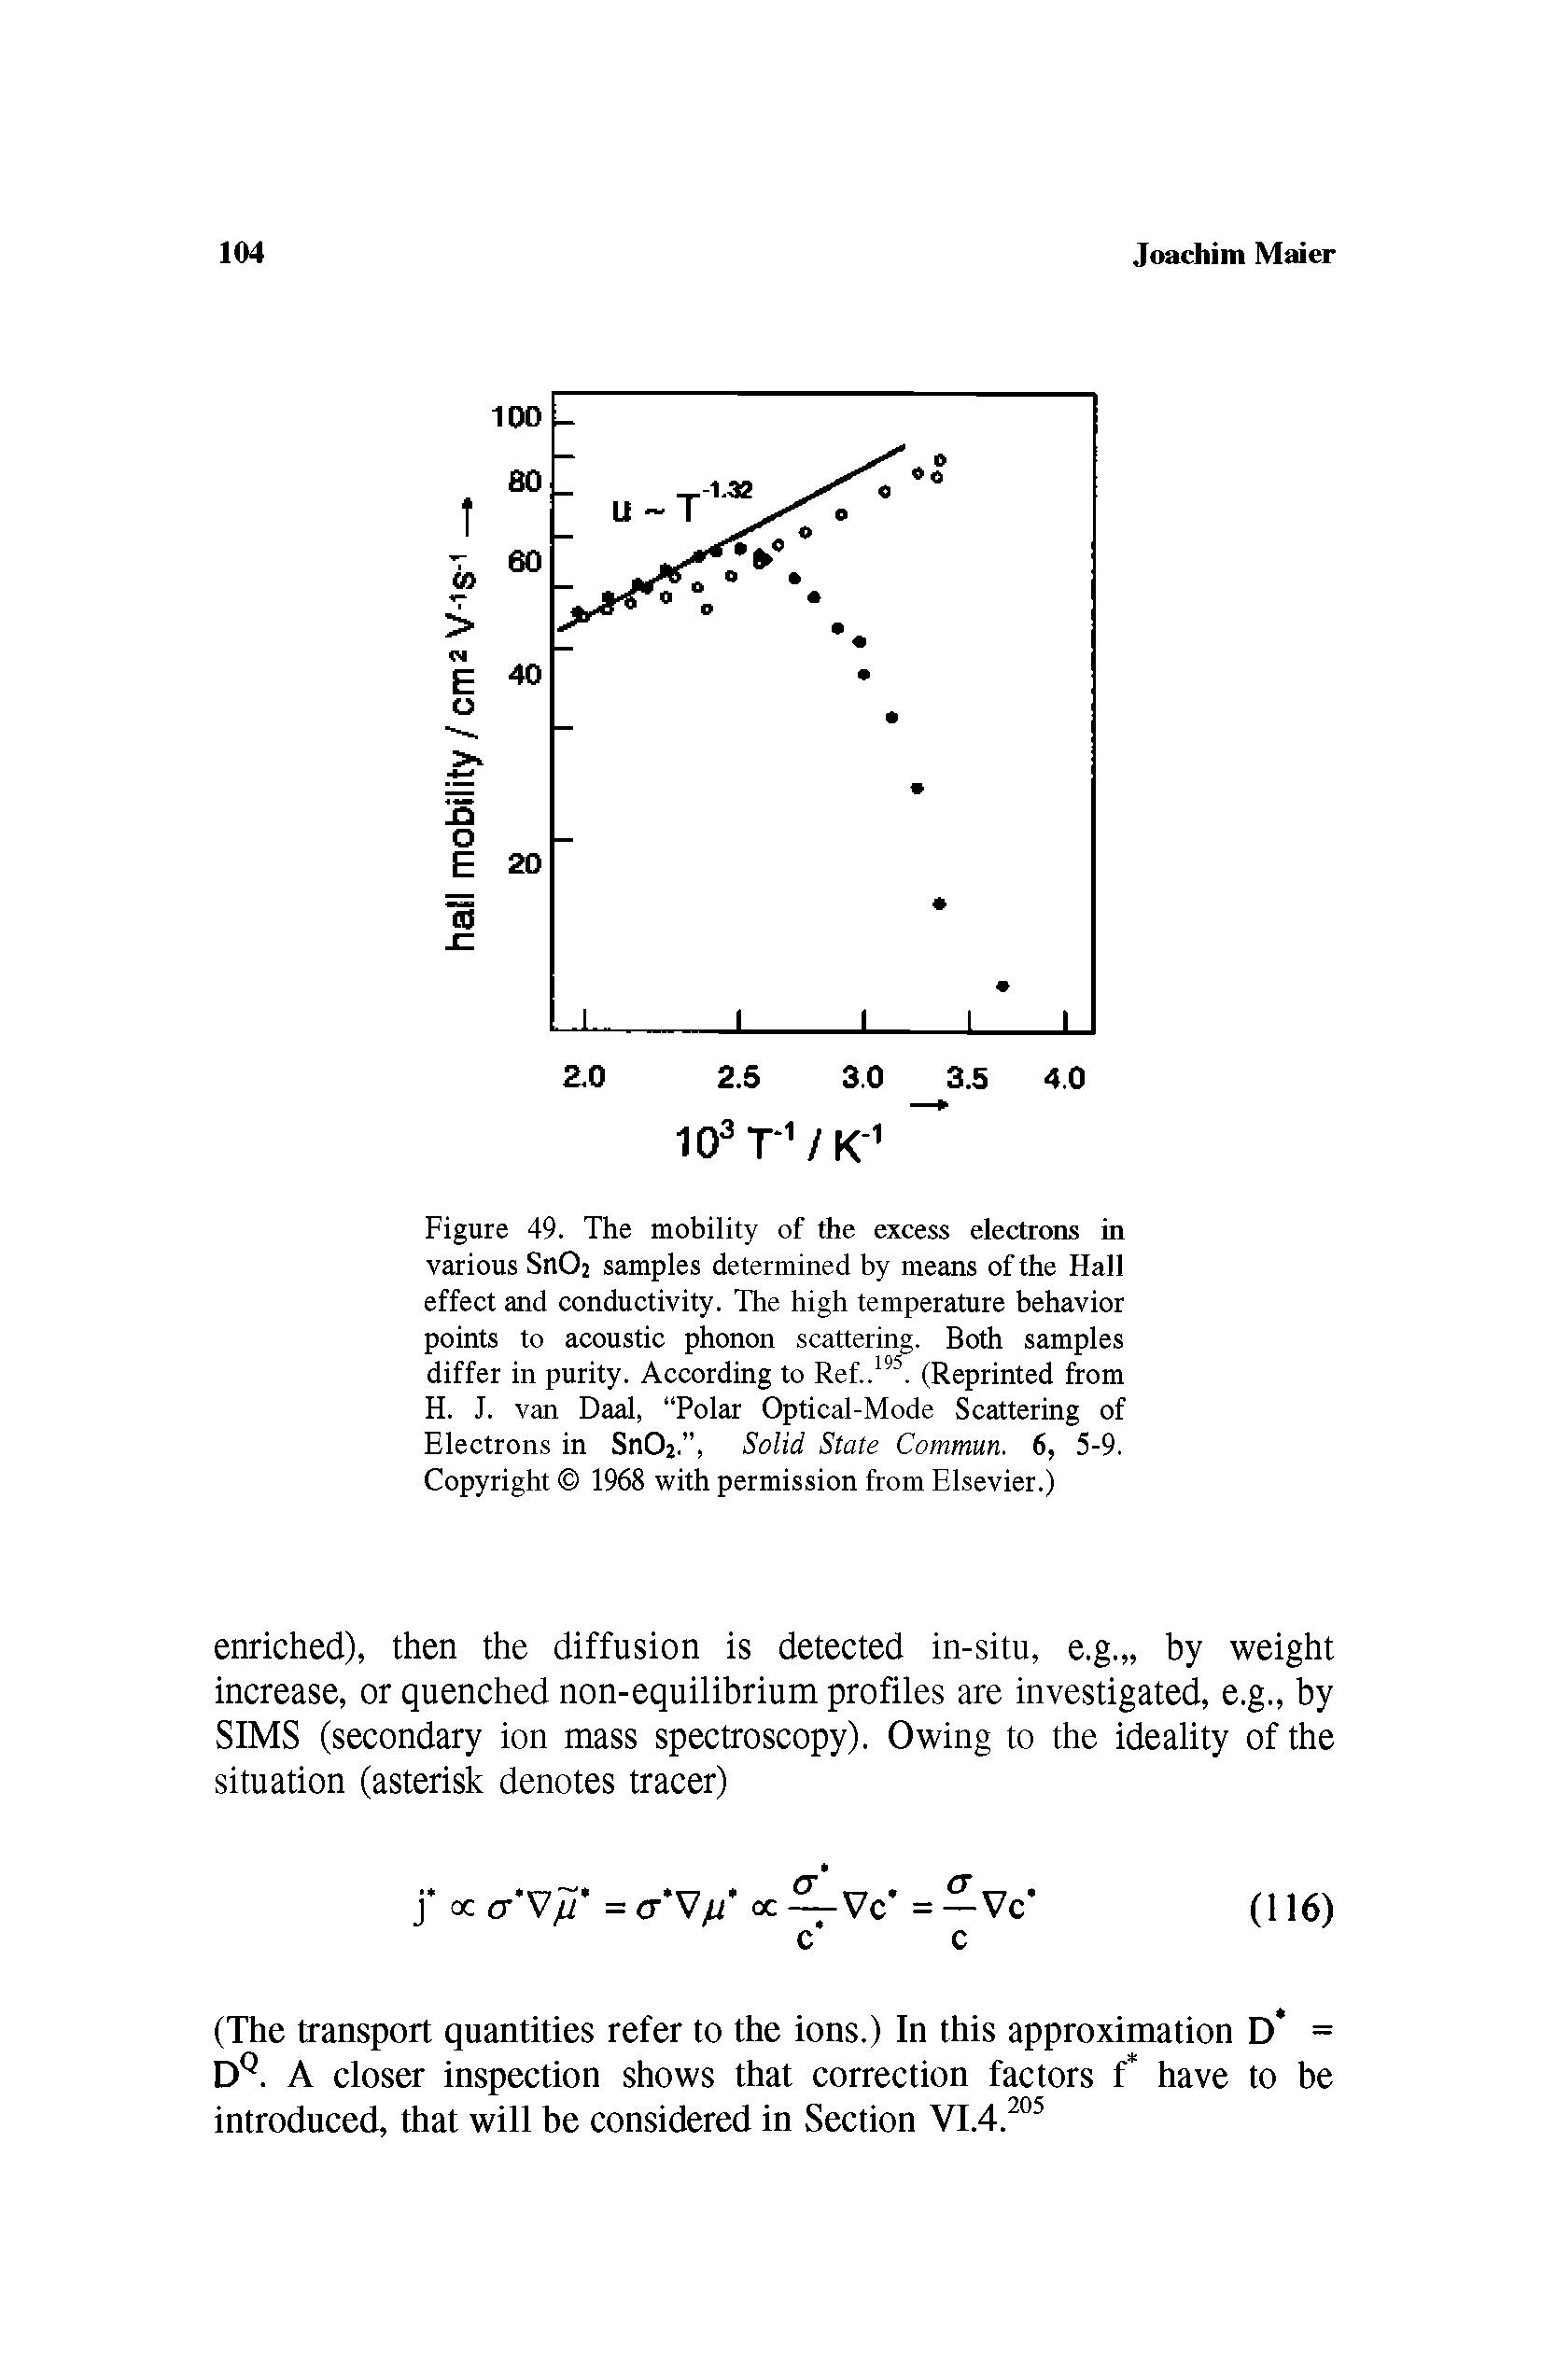 Figure 49. The mobility of the excess electrons in various SnCh samples determined by means of the Hall effect and conductivity. The high temperature behavior points to acoustic phonon scattering. Both samples differ in purity. According to Ref..155. (Reprinted from H. J. van Daal, Polar Optical-Mode Scattering of Electrons in SnC>2. , Solid State Commun. 6, 5-9. Copyright 1968 with permission from Elsevier.)...